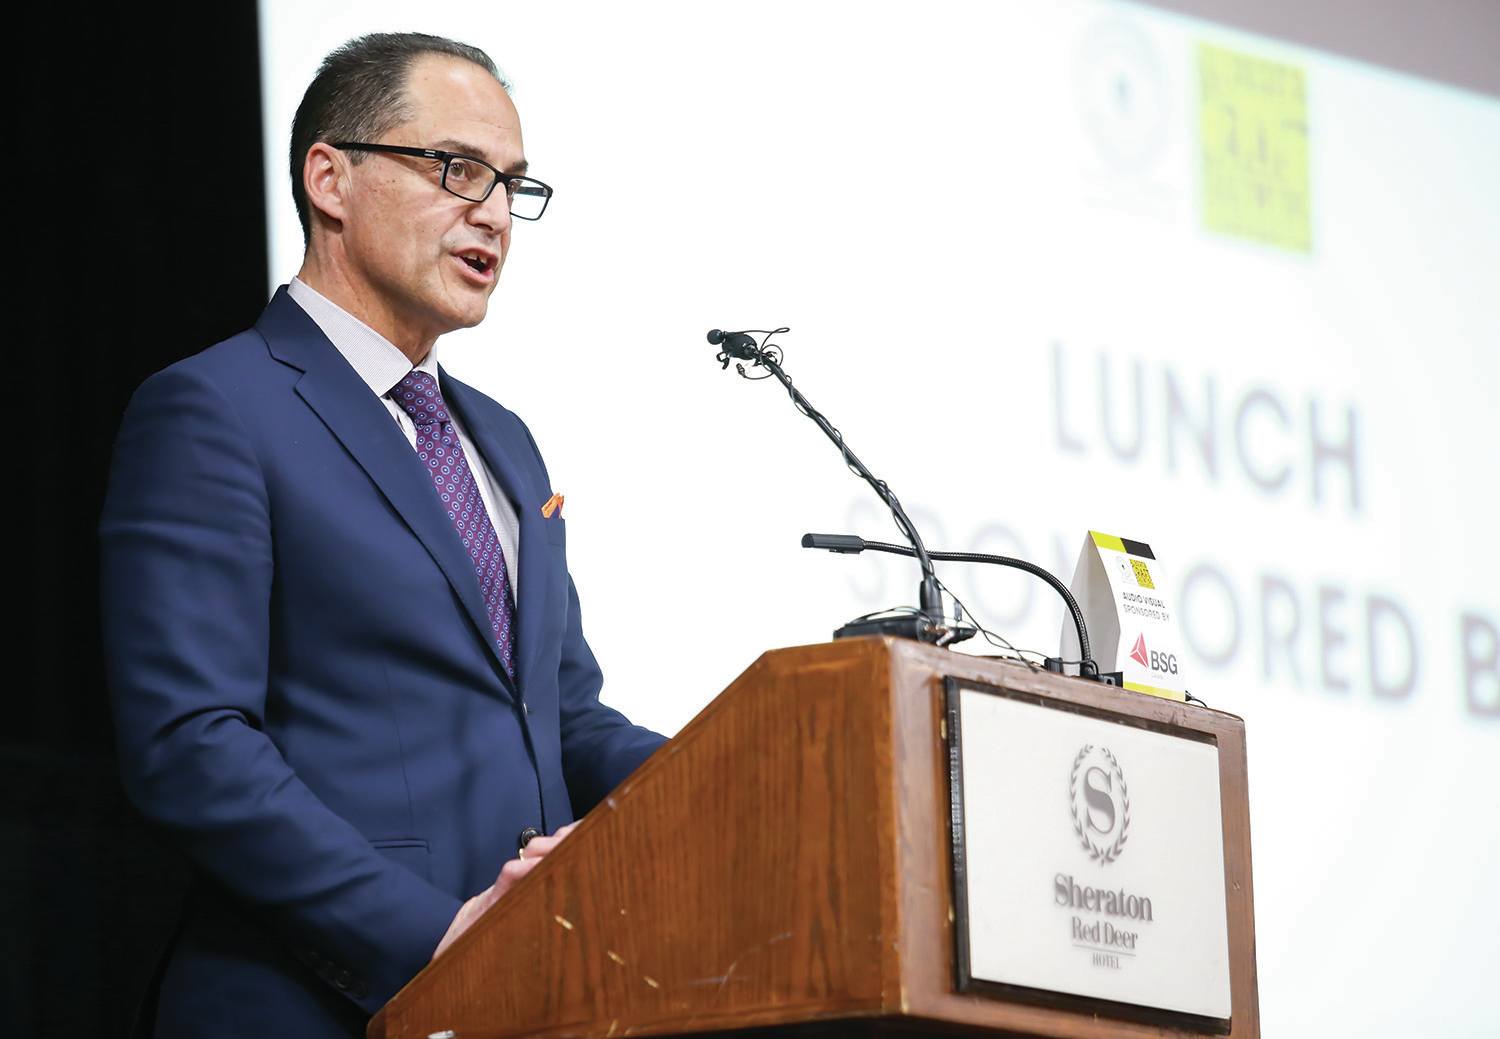 EXPANSION - Alberta Finance Minister Joe Ceci spoke at the Alberta Craft Brewers Convention in Red Deer on Wednesday. During his speech he announced an expansion of the Alberta Small Brewers Development Program.